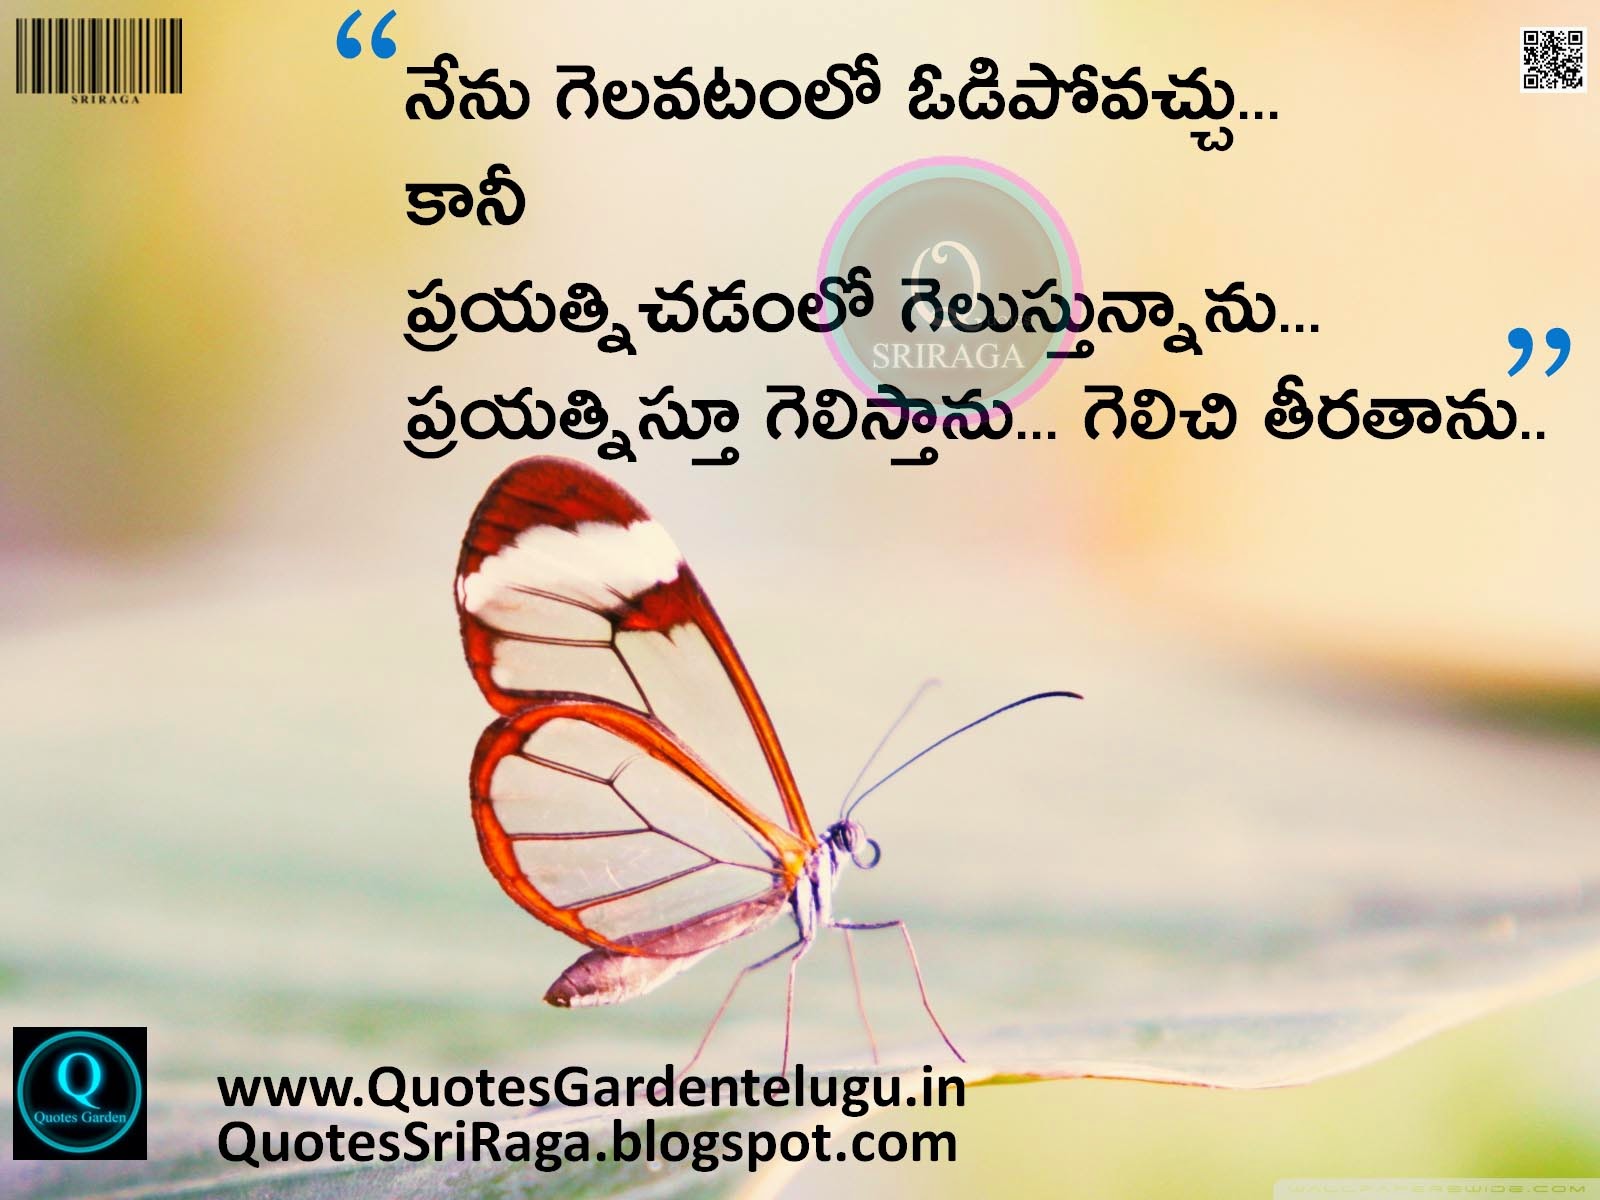 Best Telugu life quotes with hd wallpapers 122